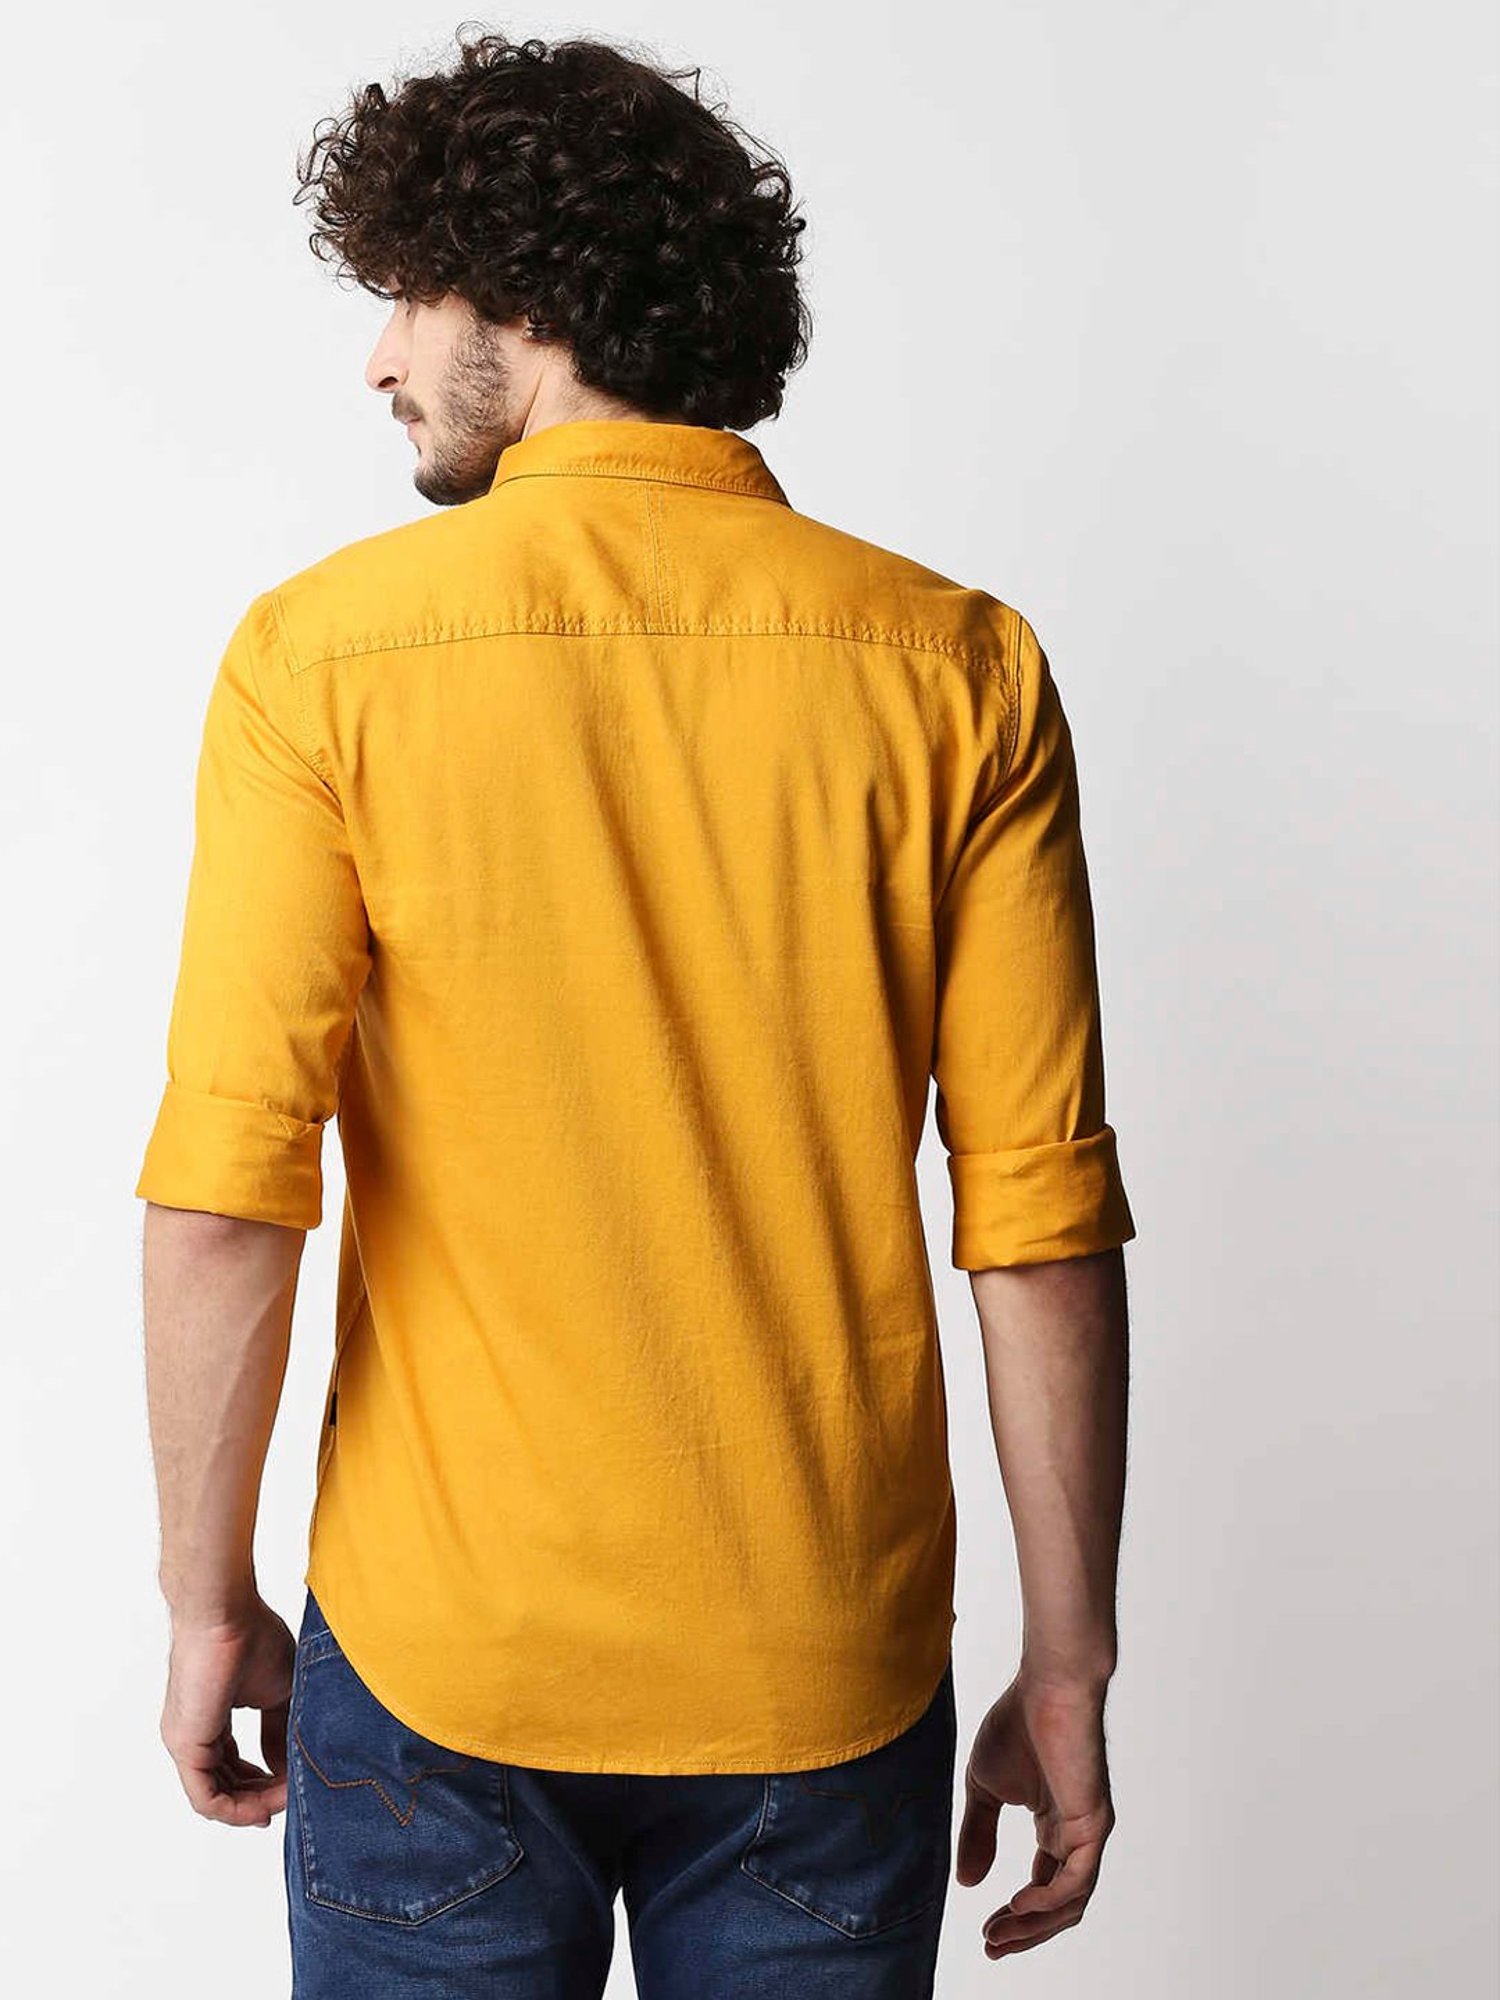 Blue Denim Jacket with Yellow Crew-neck T-shirt Outfits For Men (14 ideas &  outfits) | Lookastic